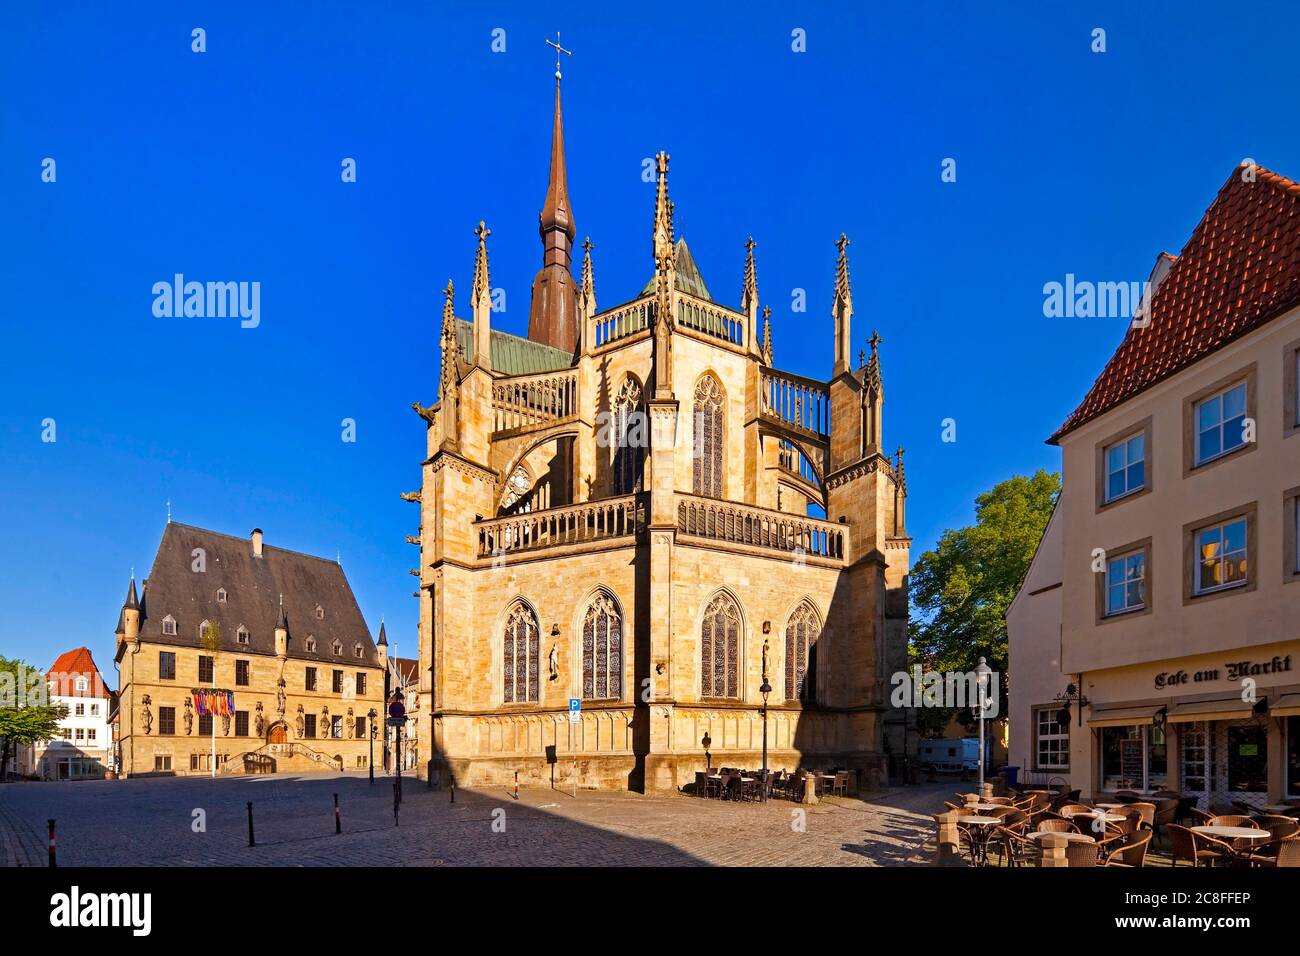 St Marien Church and town hall in the old city, Germany, Lower Saxony, Osnabrueck Stock Photo